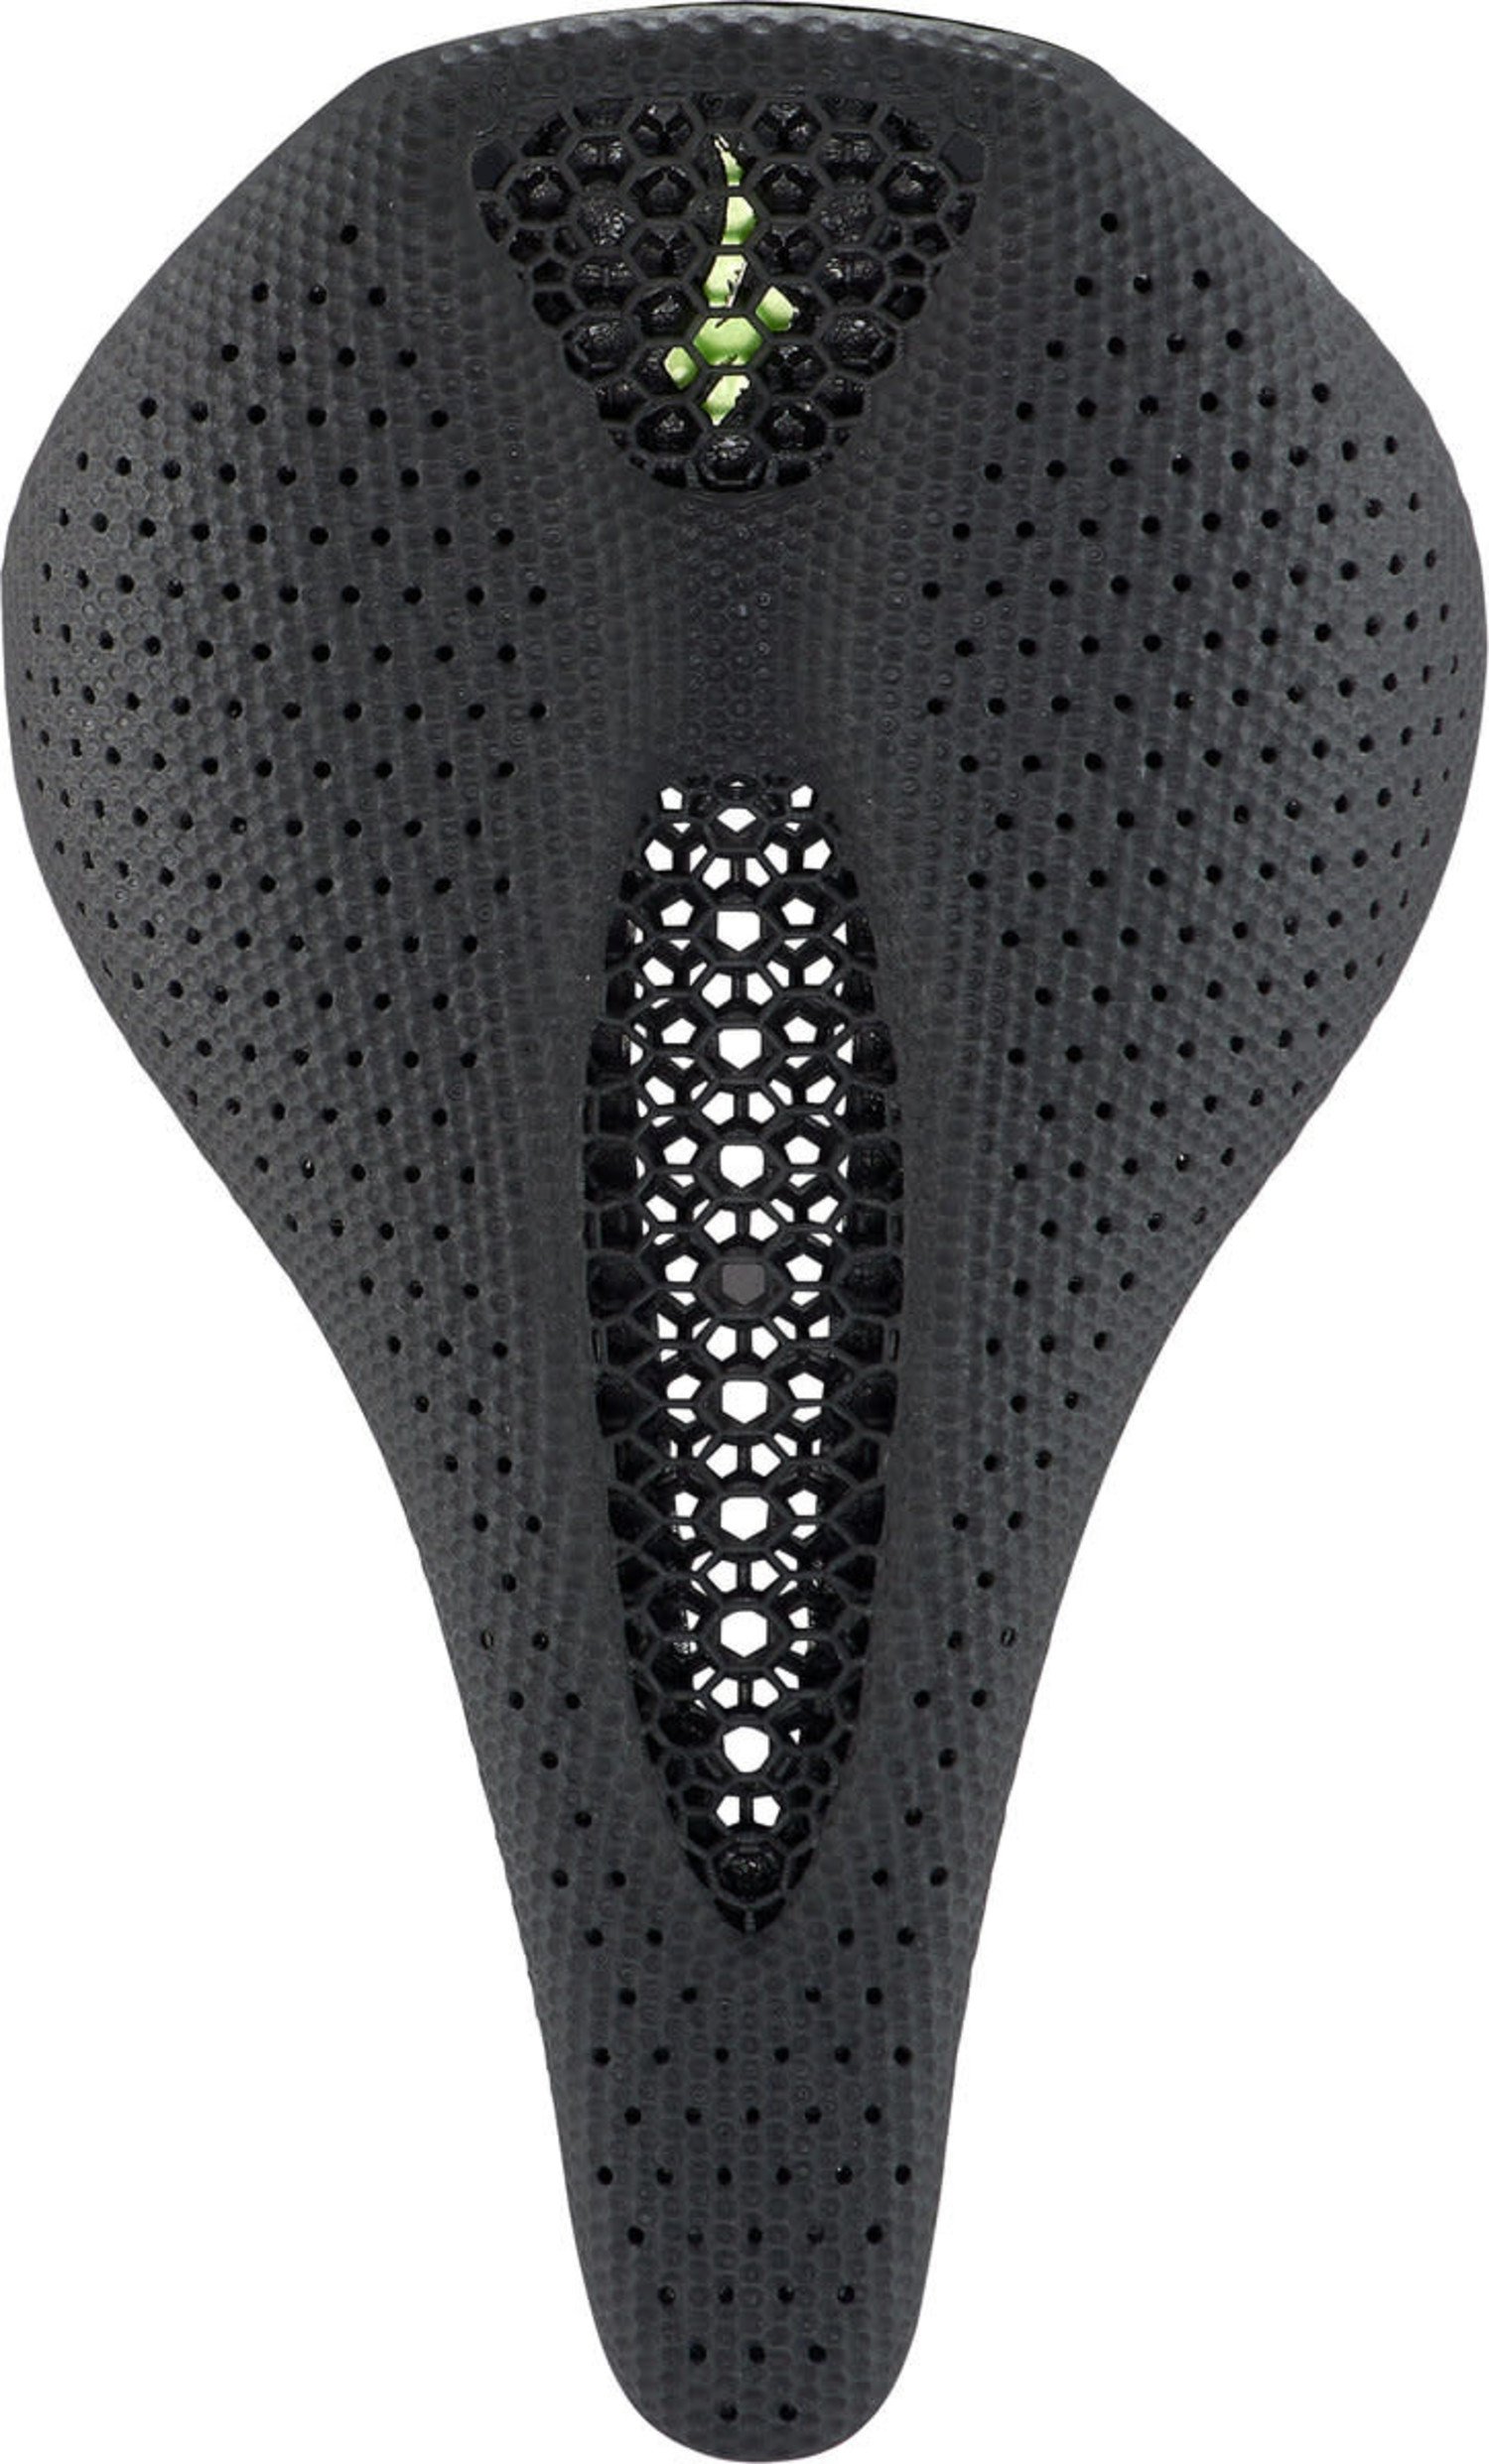 S-WORKS POWER CARBON SADDLE-